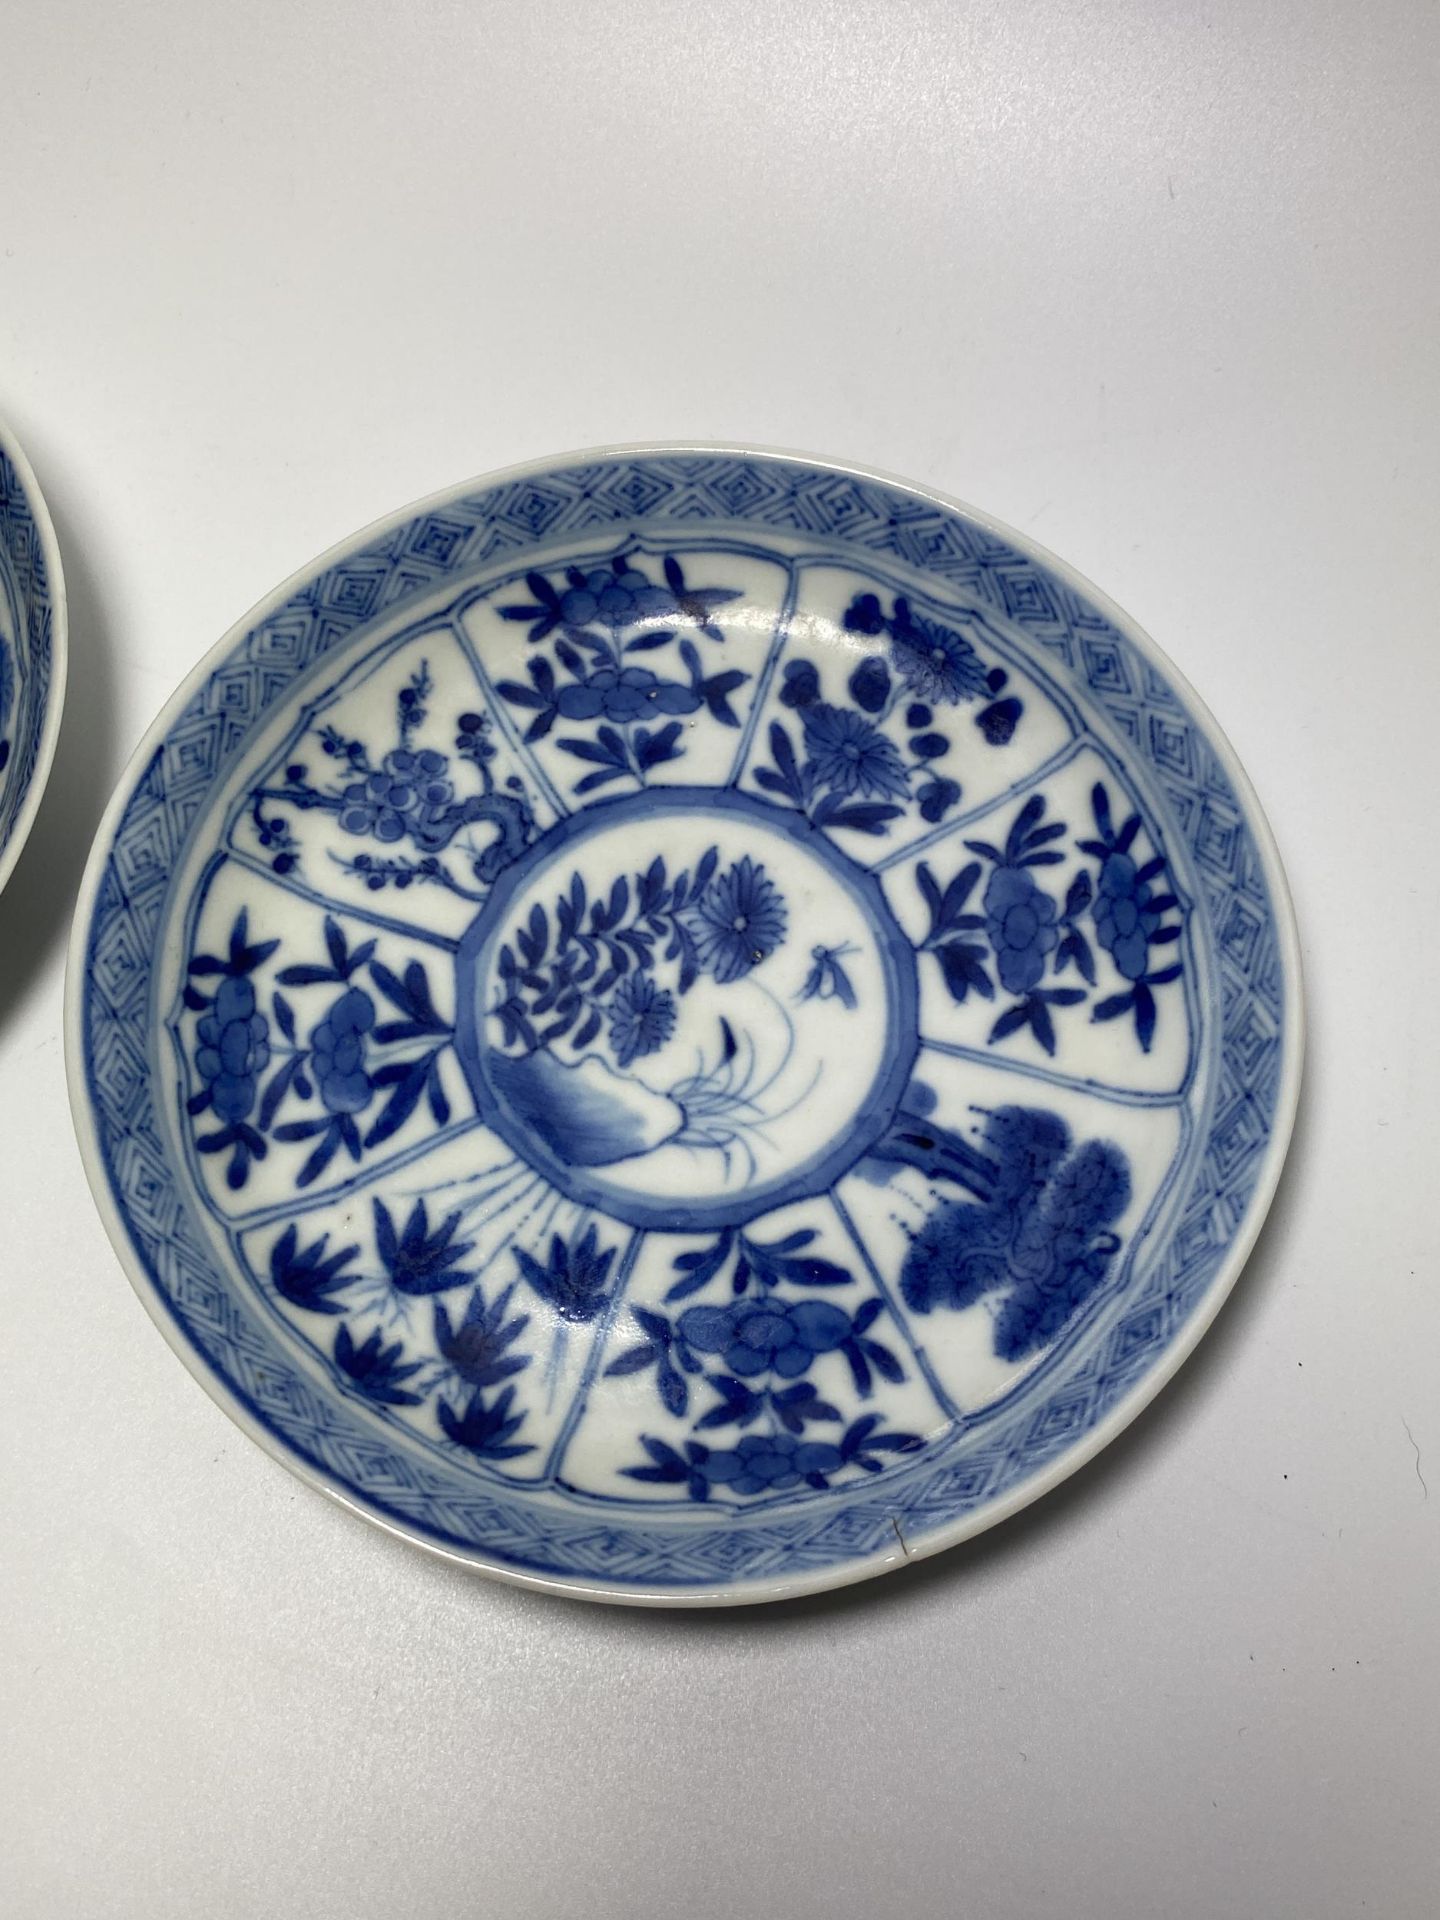 A PAIR OF KANGXI PERIOD (1661-1722) CHINESE BLUE AND WHITE PORCELAIN PLATES, ARTEMESIA LEAF MARK - Image 2 of 13